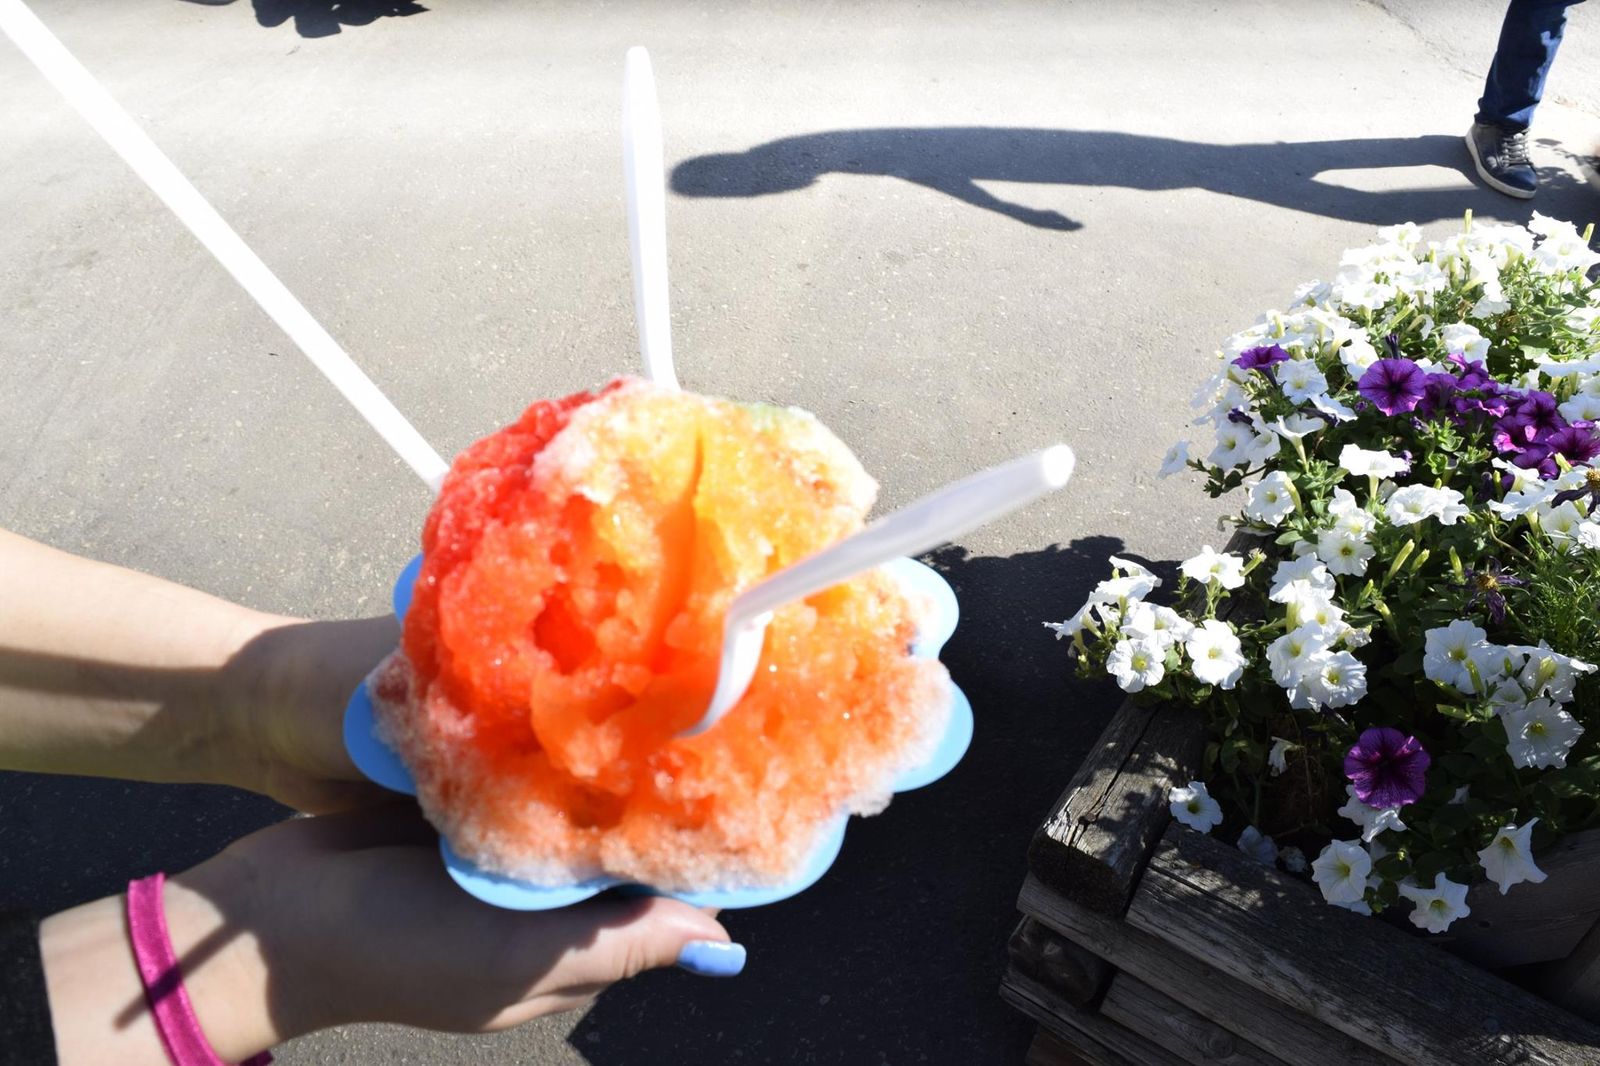 Cool down mid-day with frosty shaved ice.